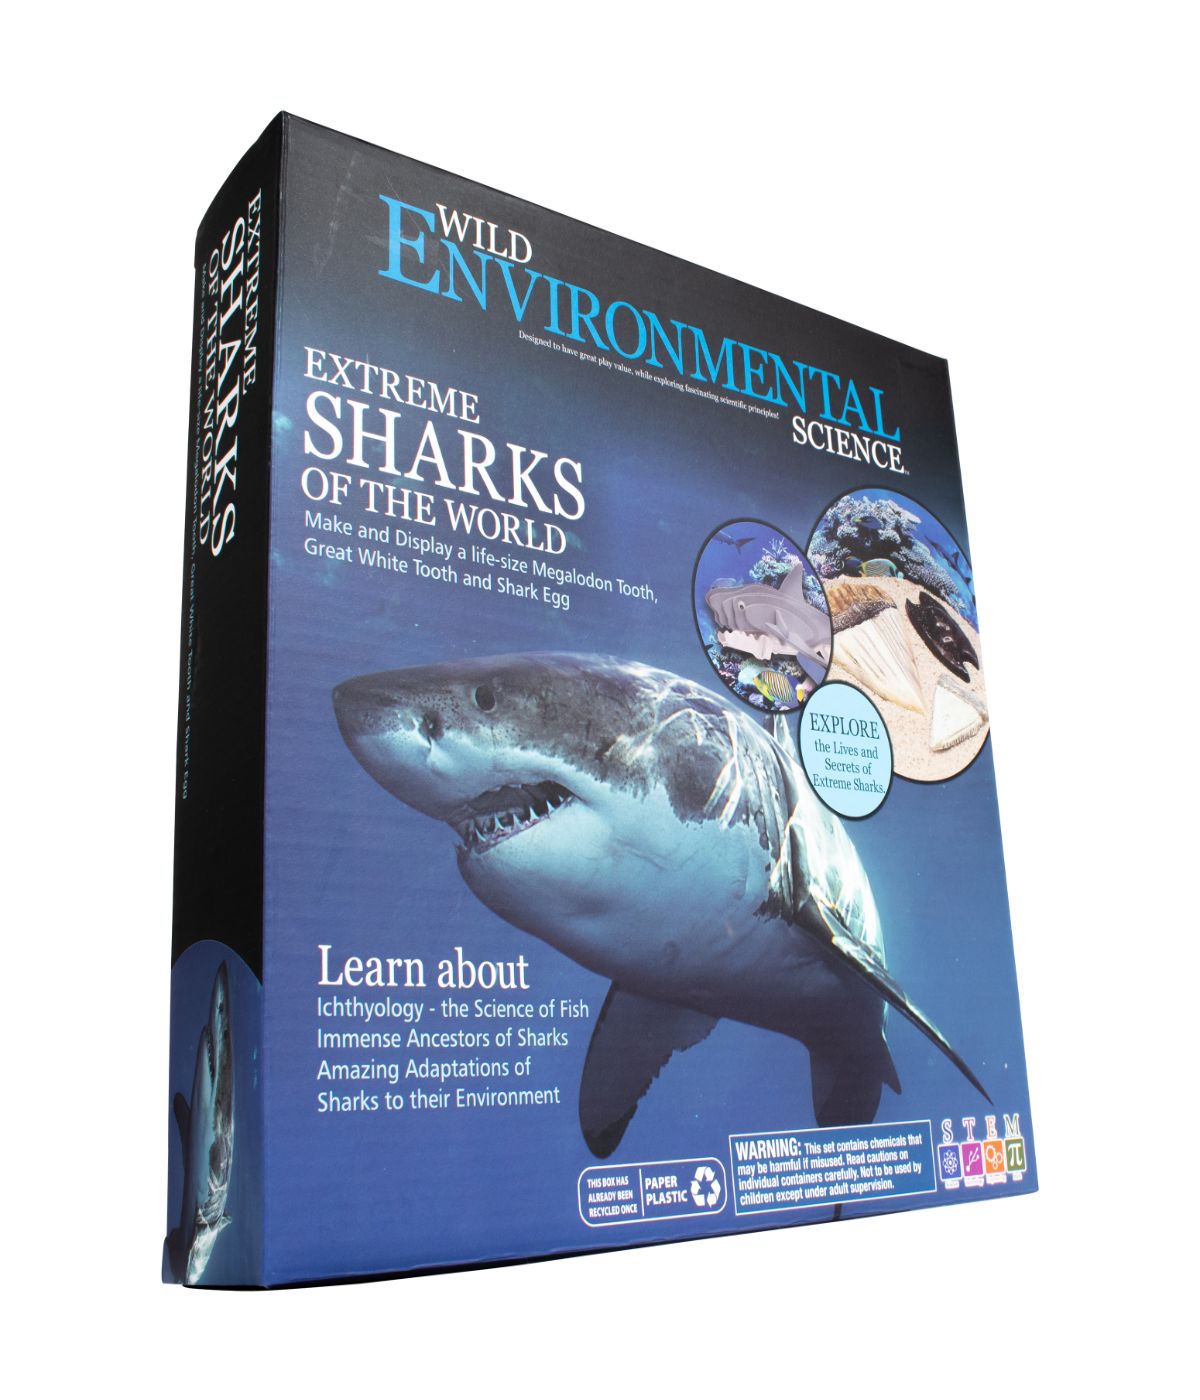 Wild Environmental Science - Extreme Sharks of the World Multi